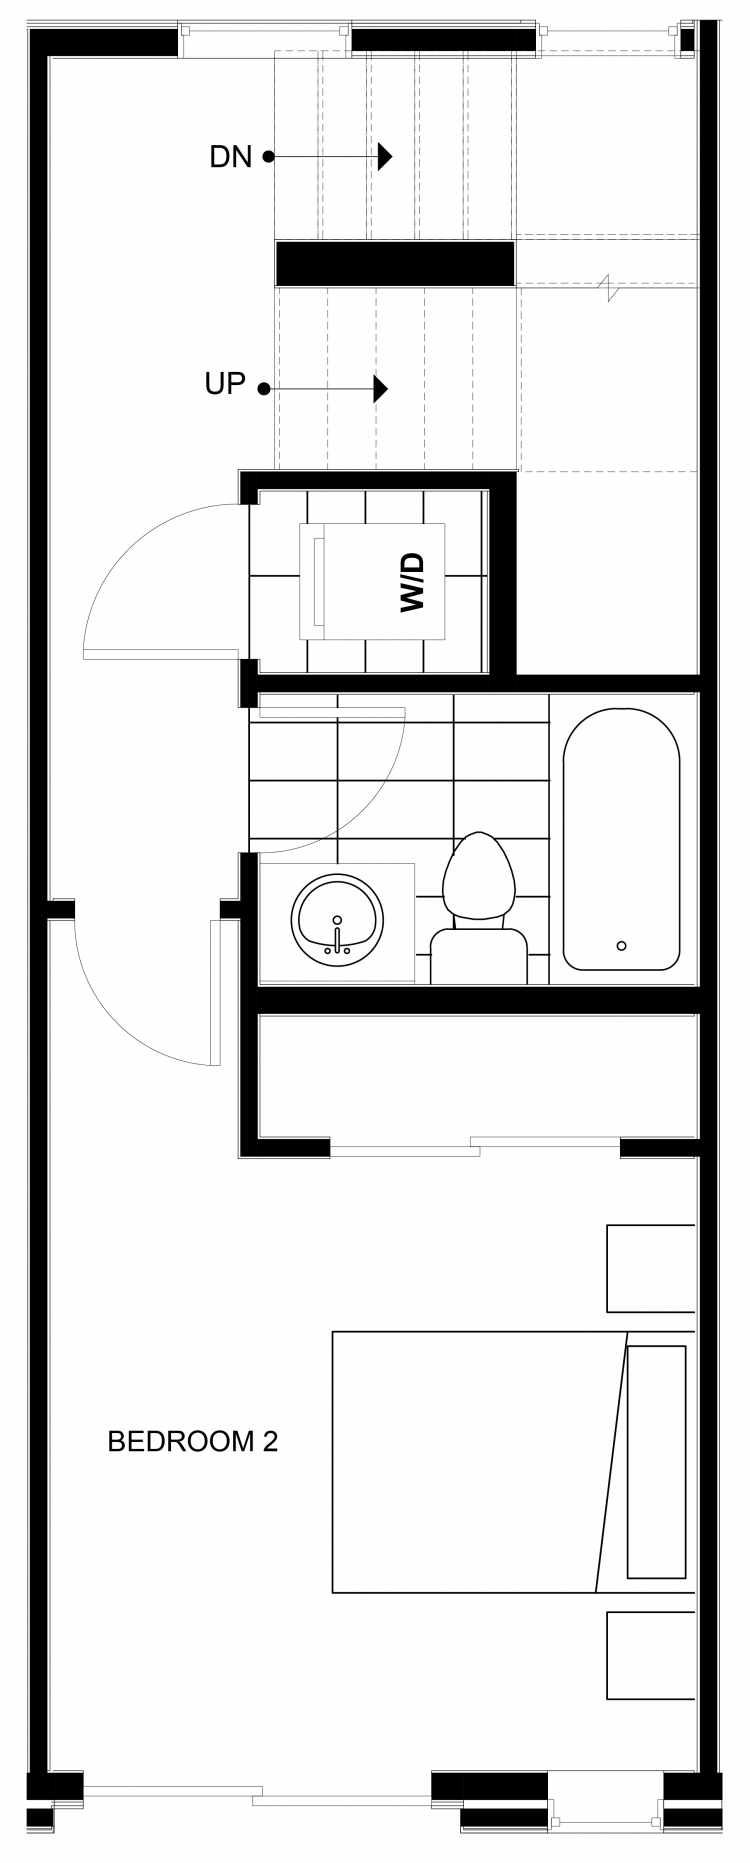 Third Floor Plan of 1542 15th Ave E, One of the Grandview Townhomes in Capitol Hill